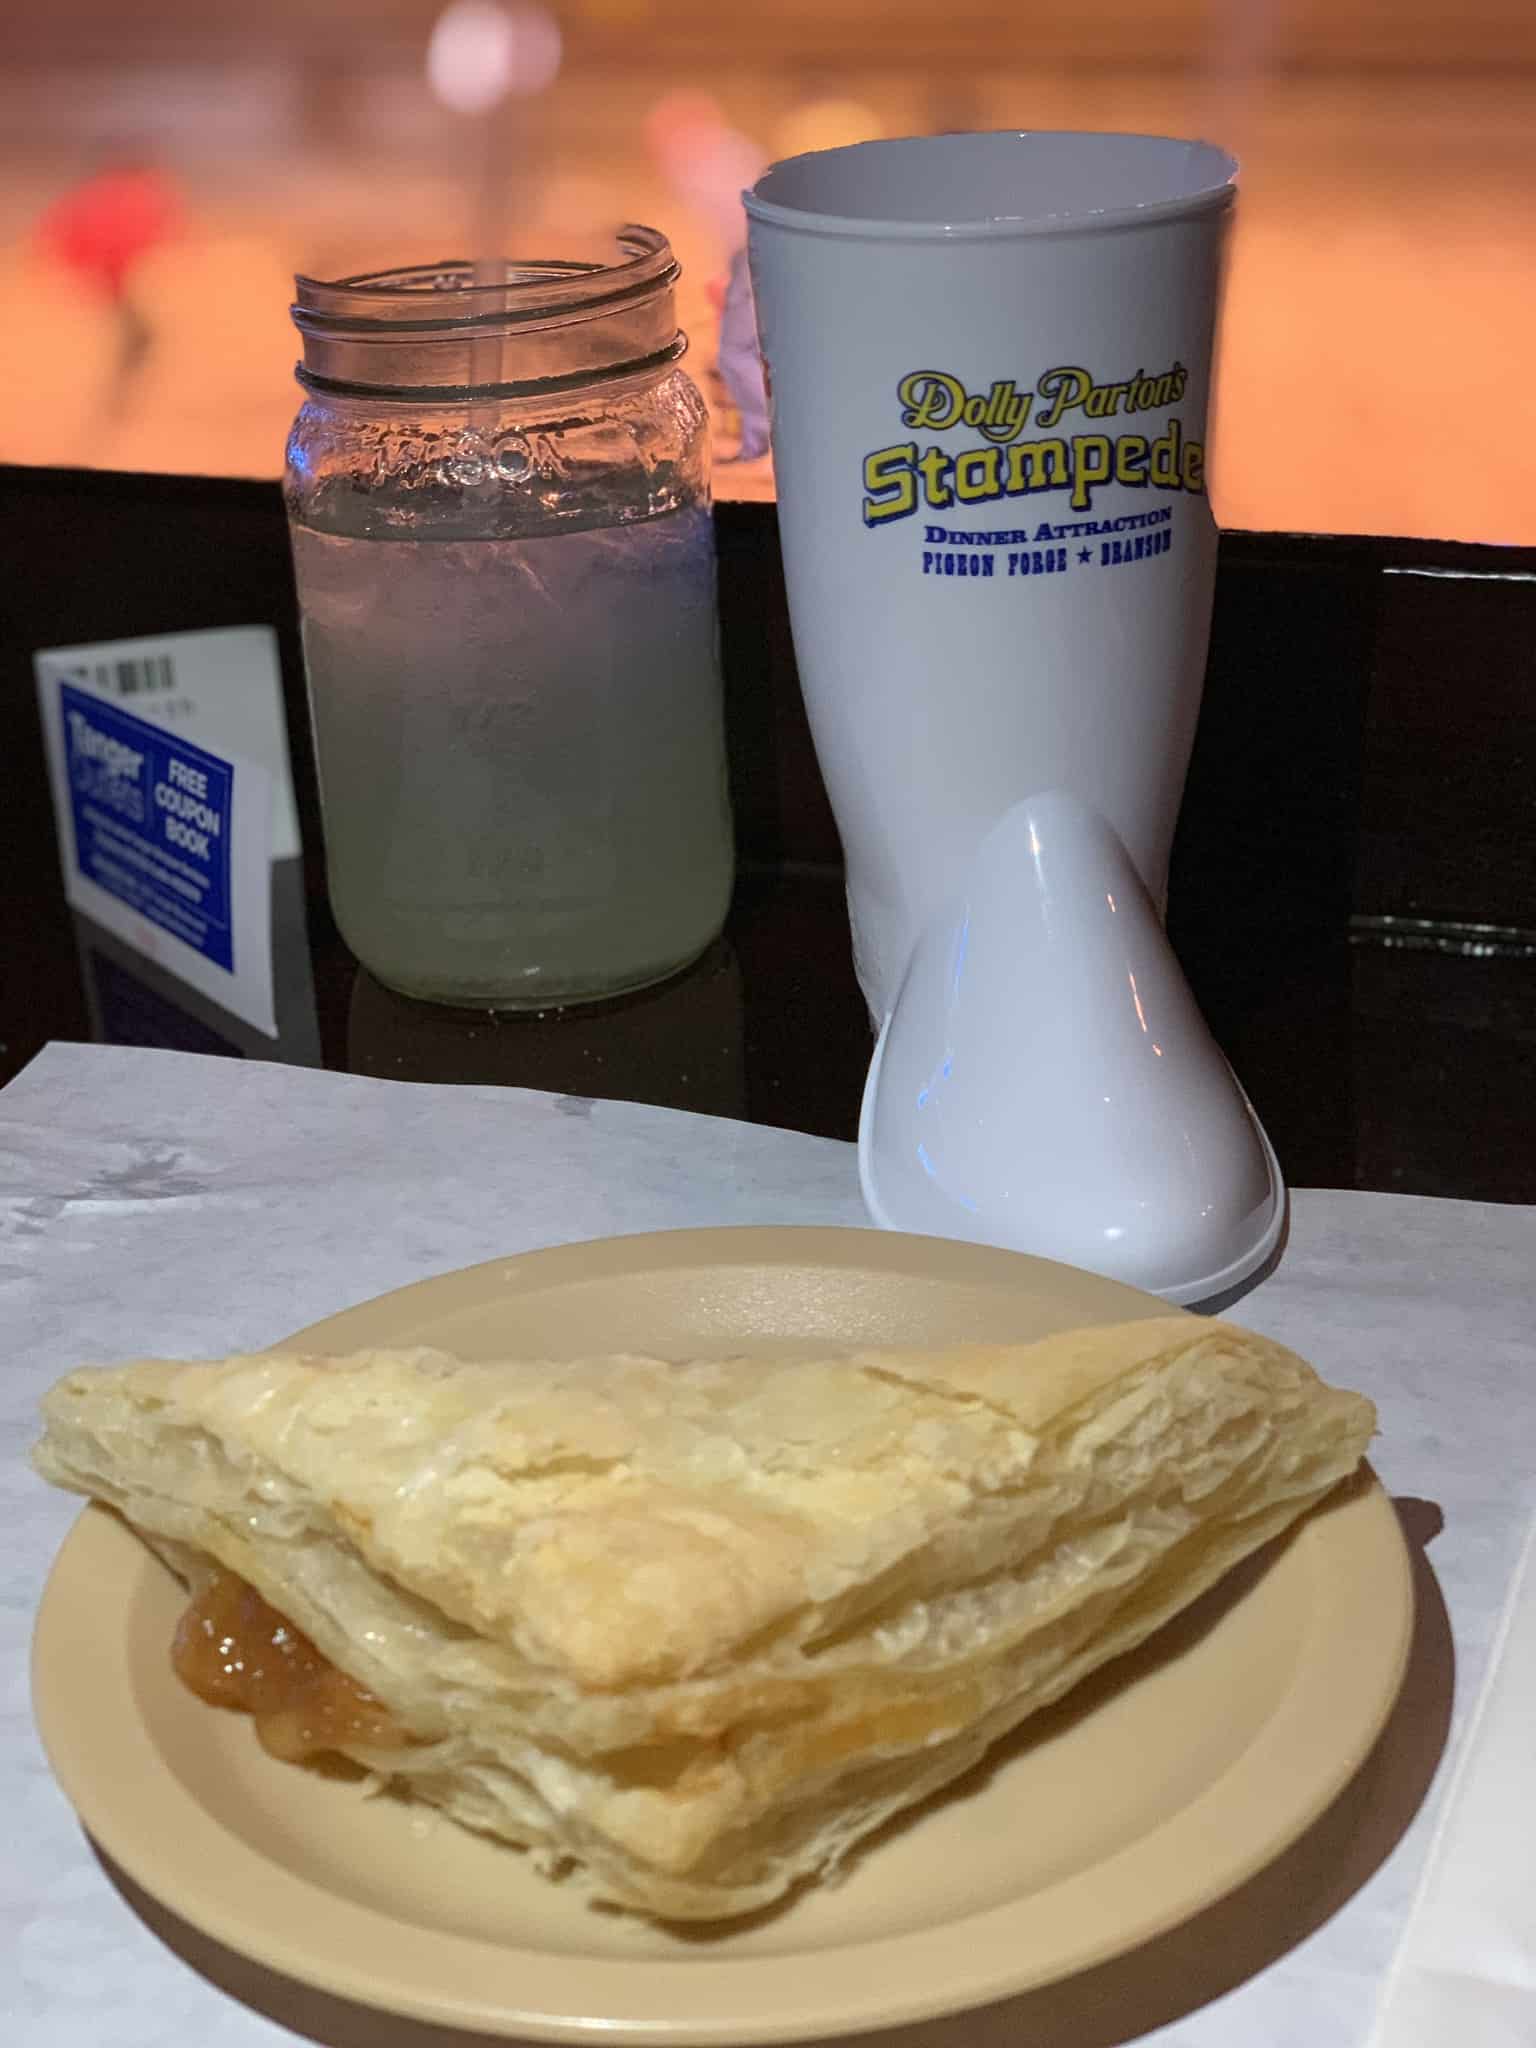 Apple Turnover, Boot-shaped Mug and drink at Dolly Parton's Stampede Dinner Attraction